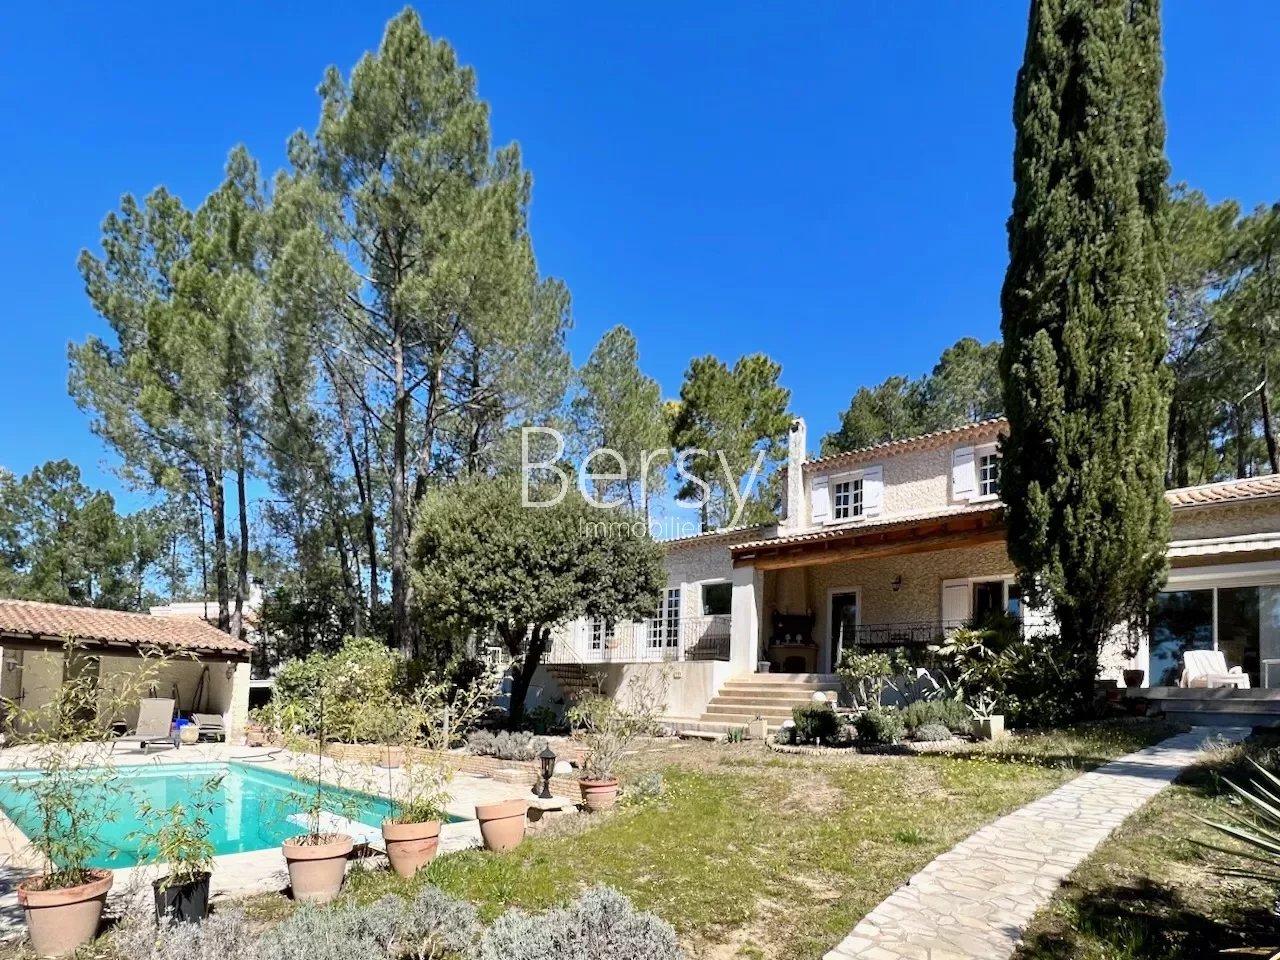 5 minutes from the center - dominant position - Villa 160m2 - 4 bedrooms (including 3 on the ground floor) - living room of 45m2 - 1370m2 of land with swimming pool